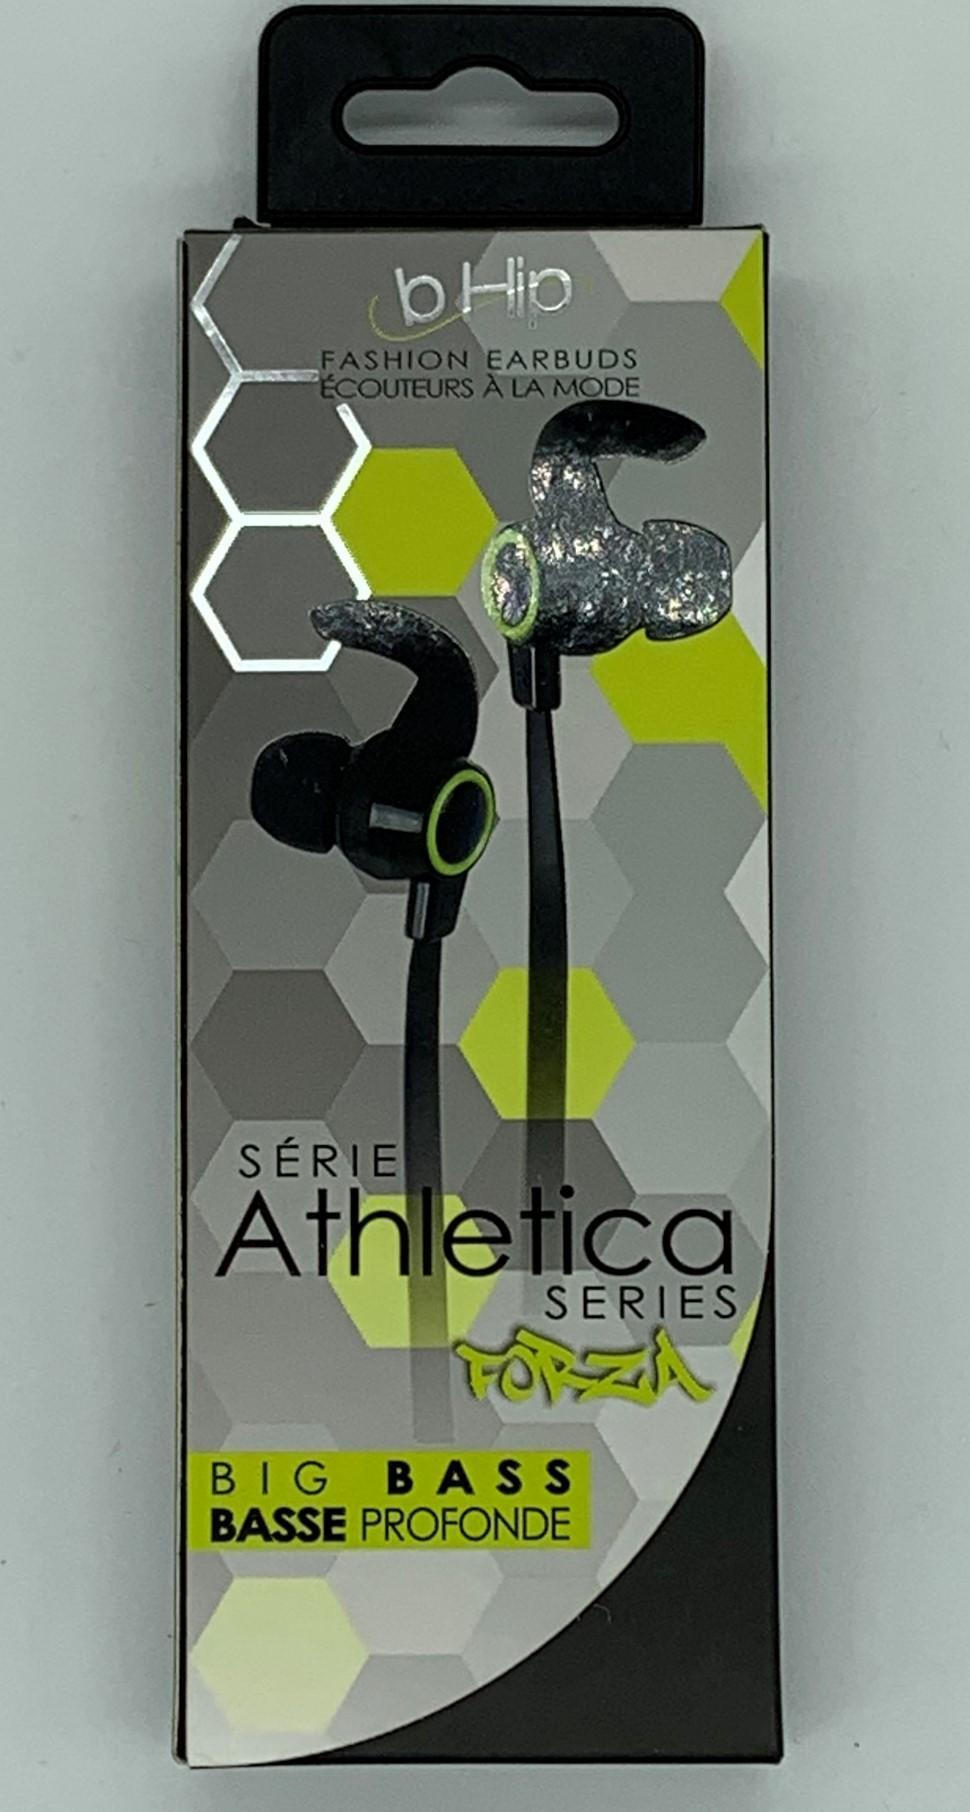 Bhip Athletica Series Earbuds Forza 